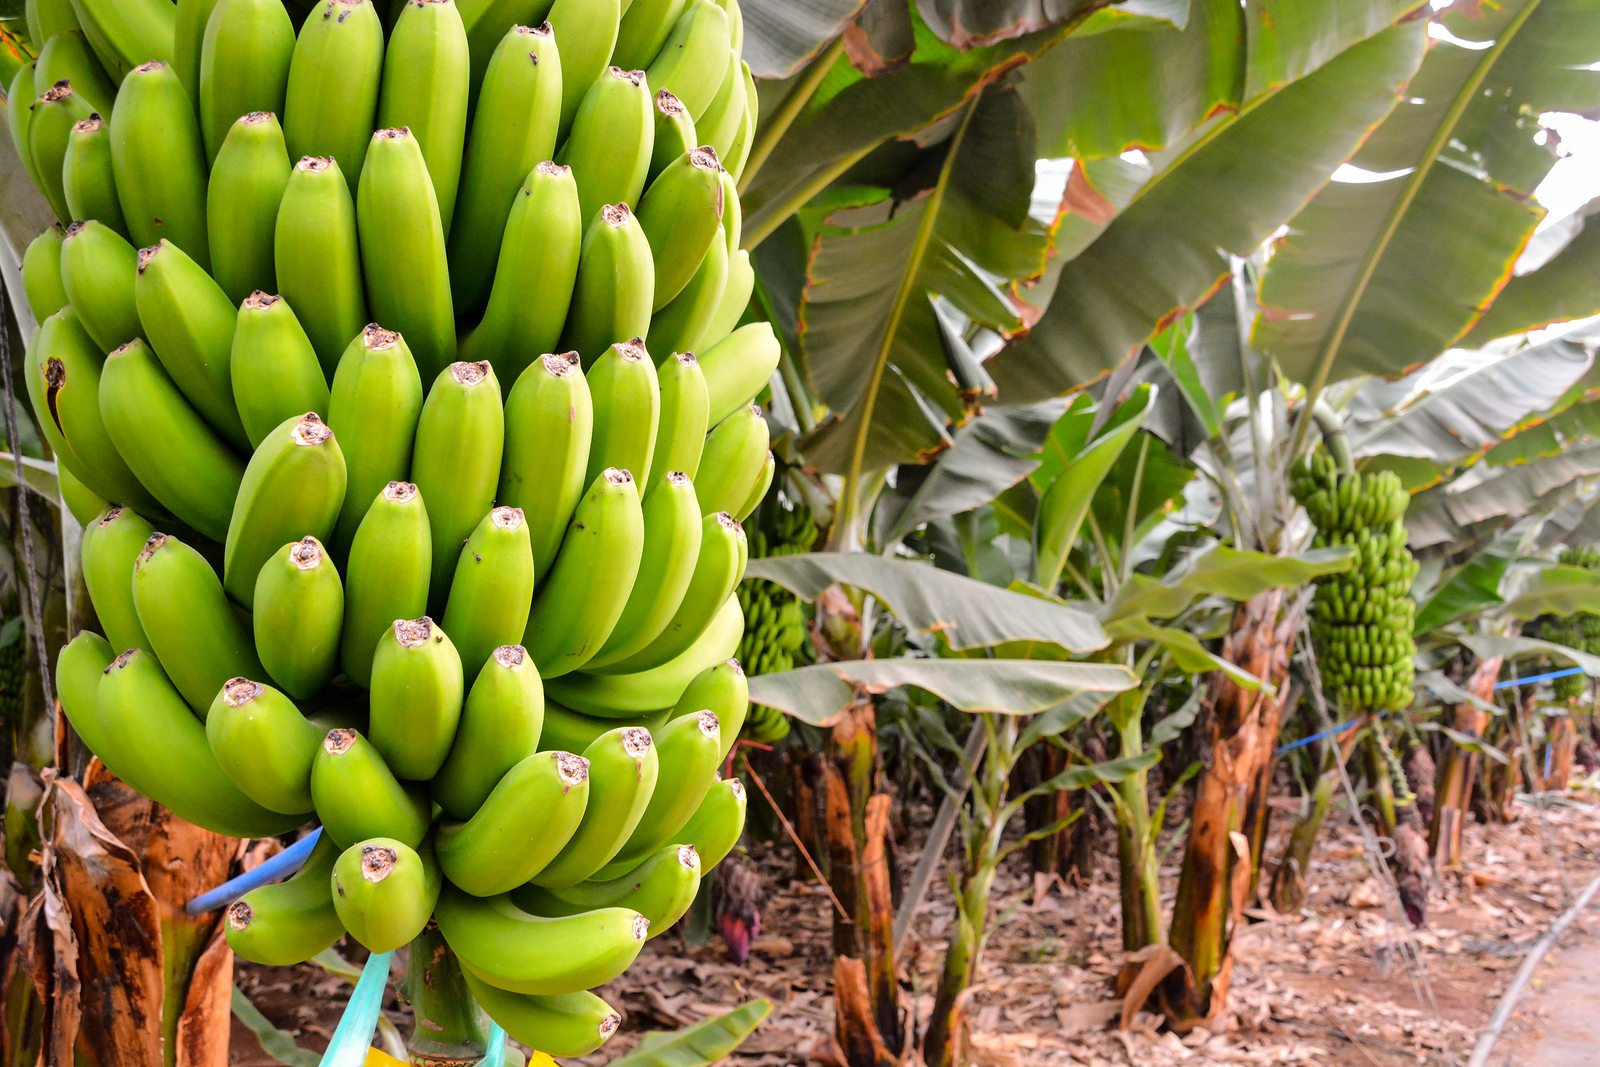 Cultivation And Benefits Of Different Cultivars Of Banana ...